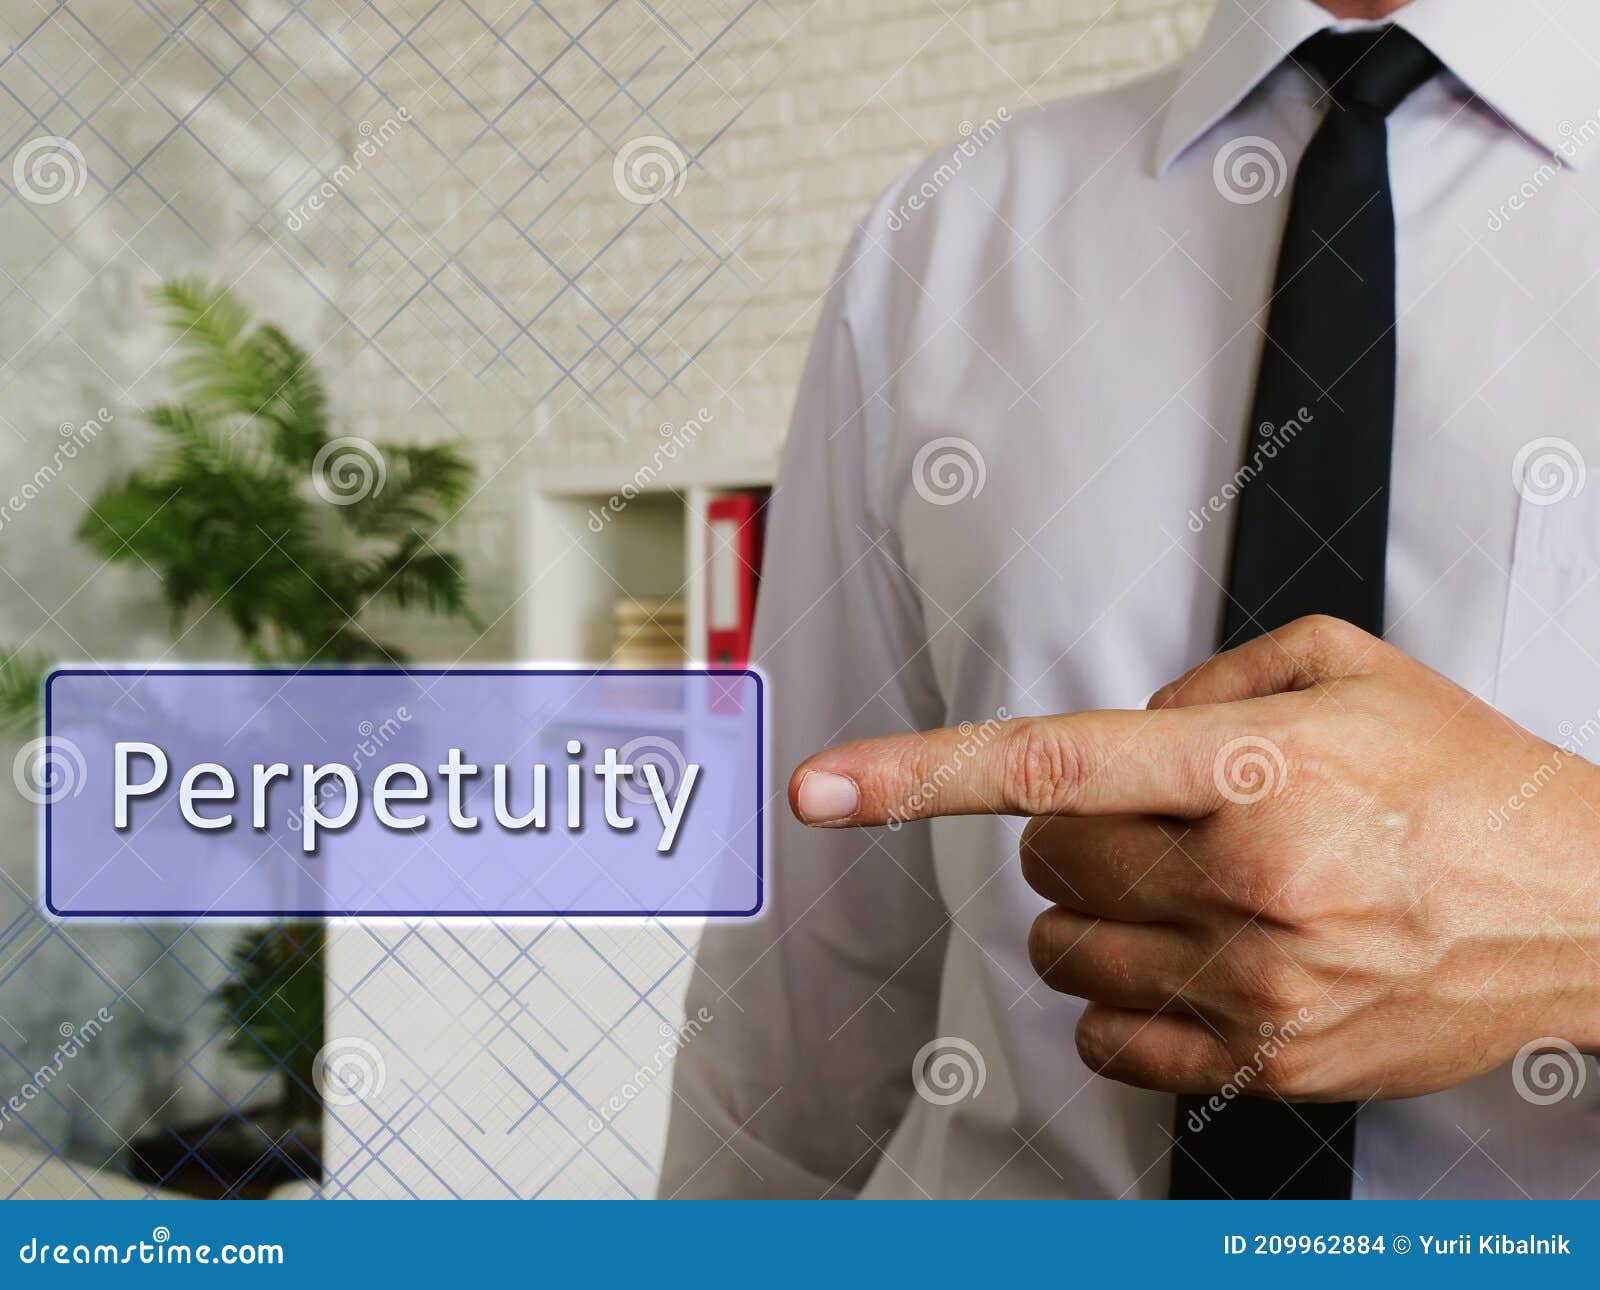 financial concept meaning perpetuity with sign on the page